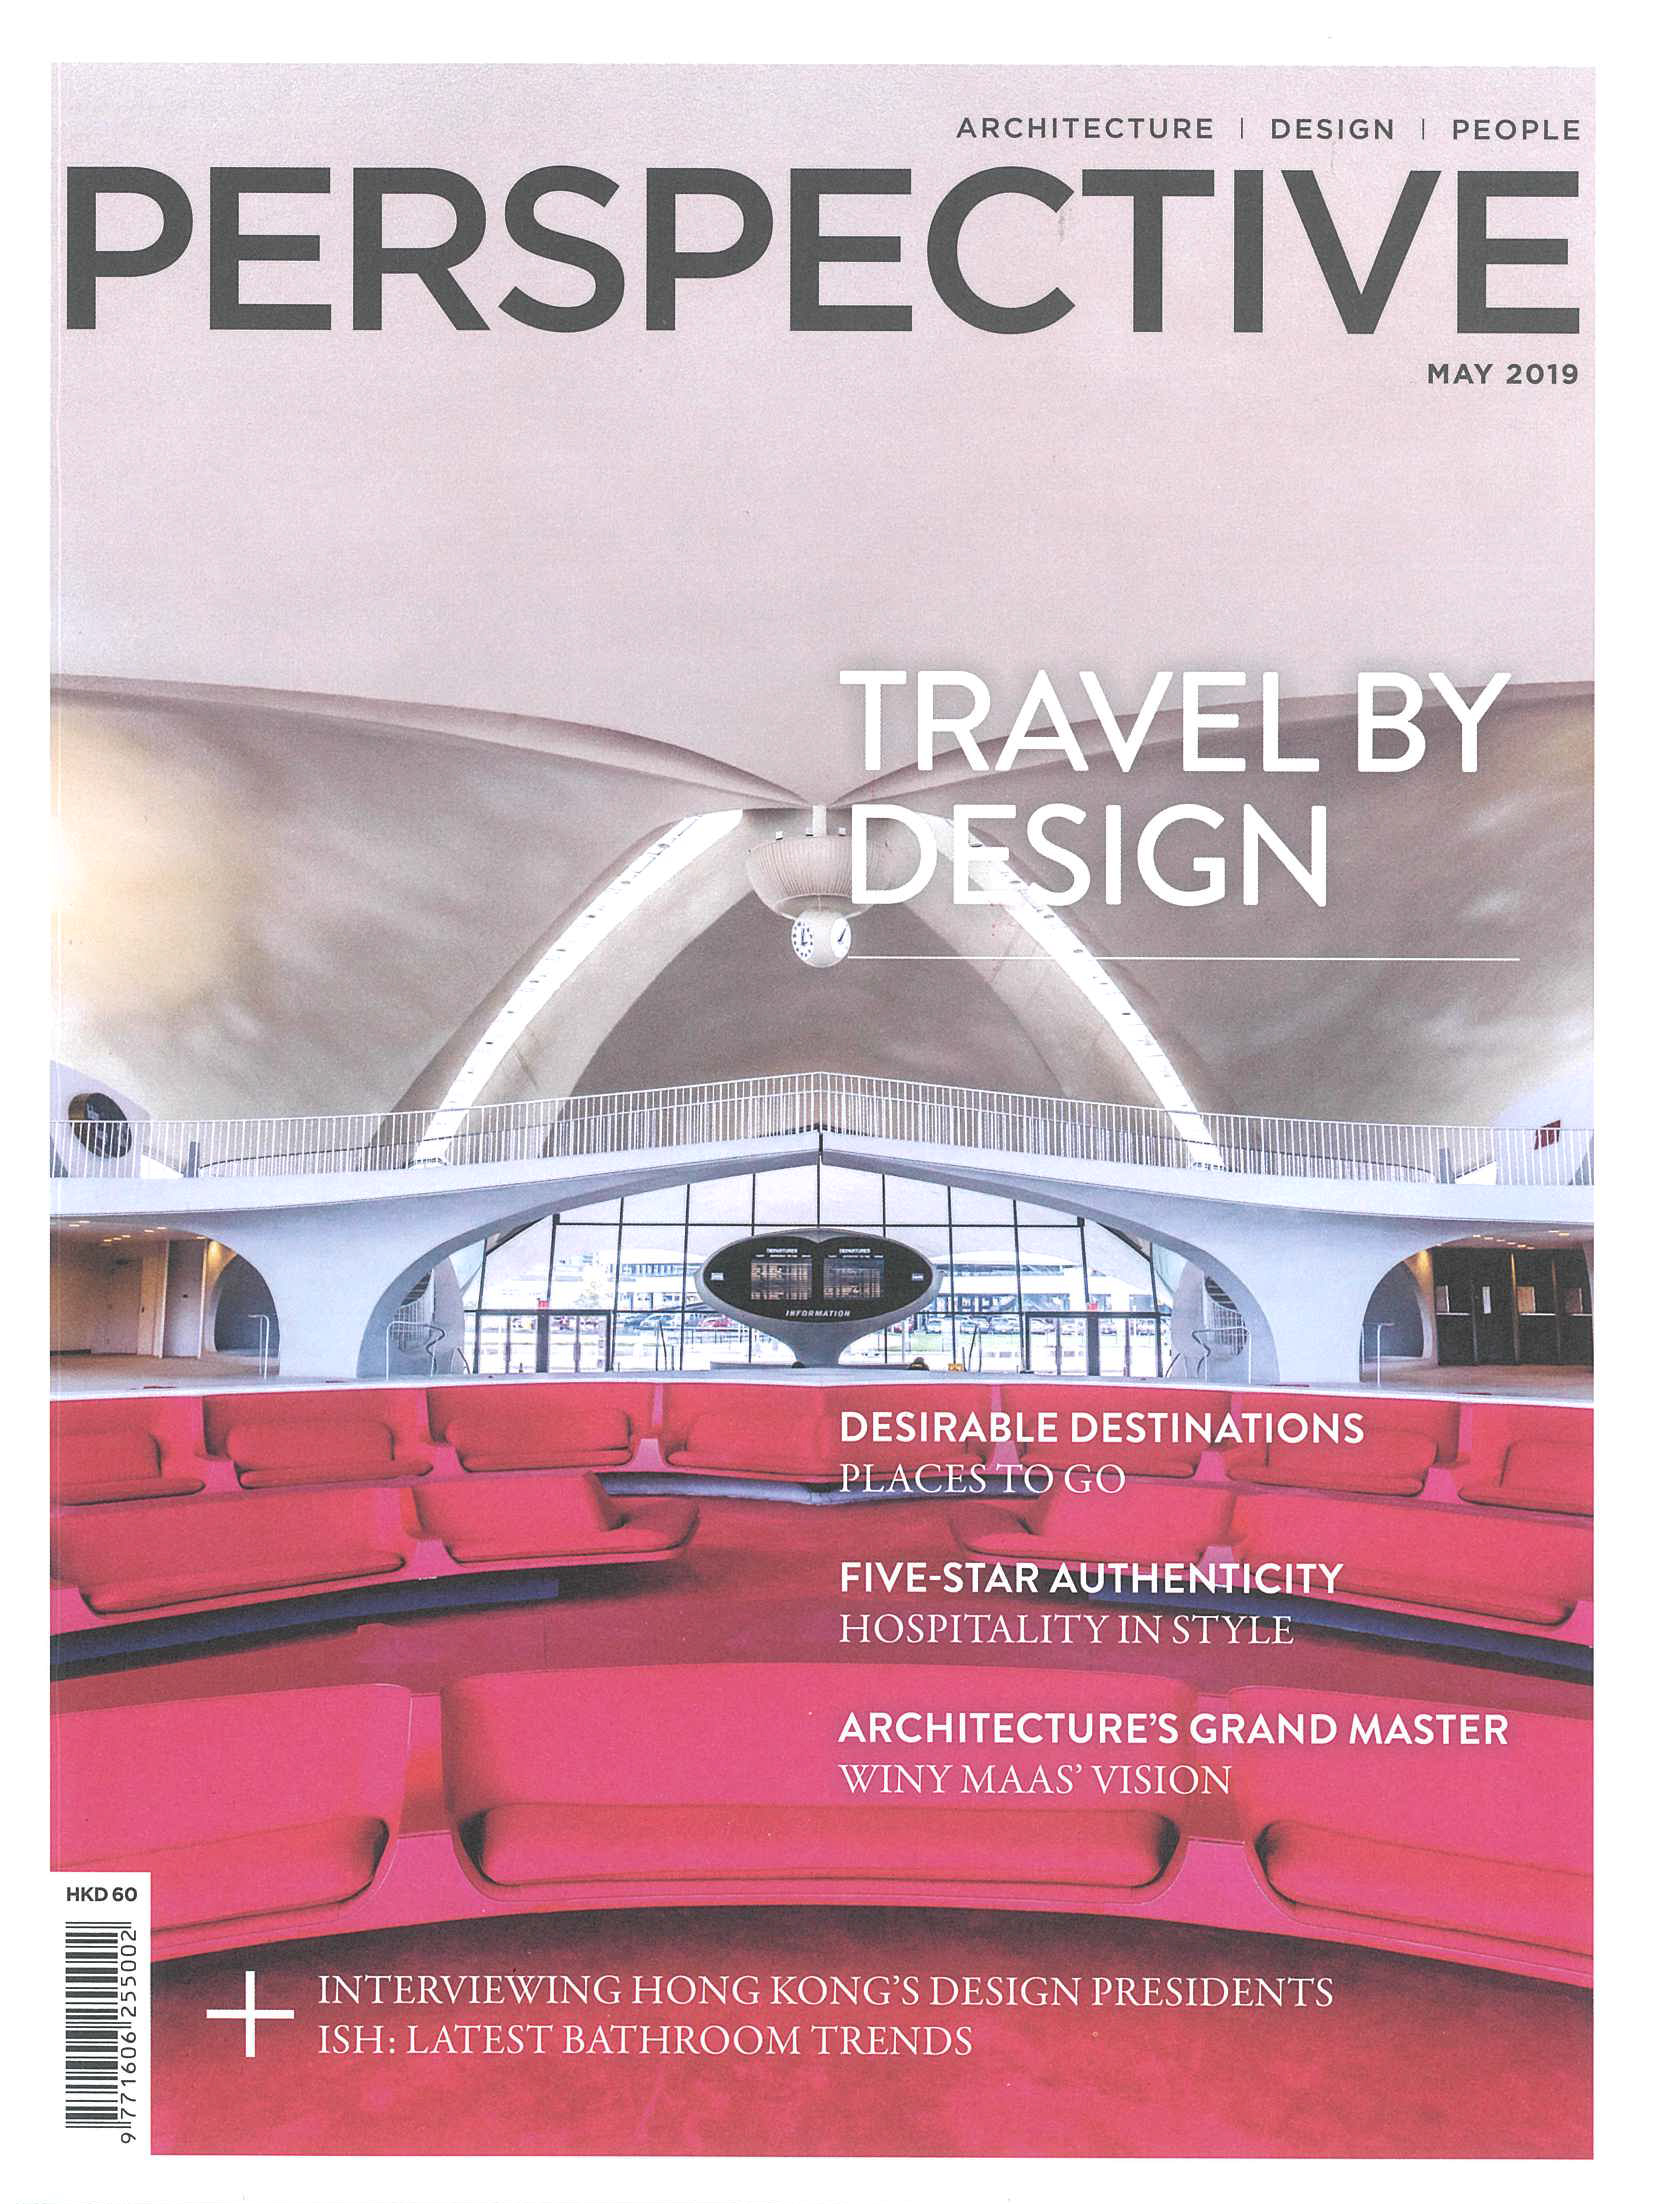 Perspective Magazine, May 2019